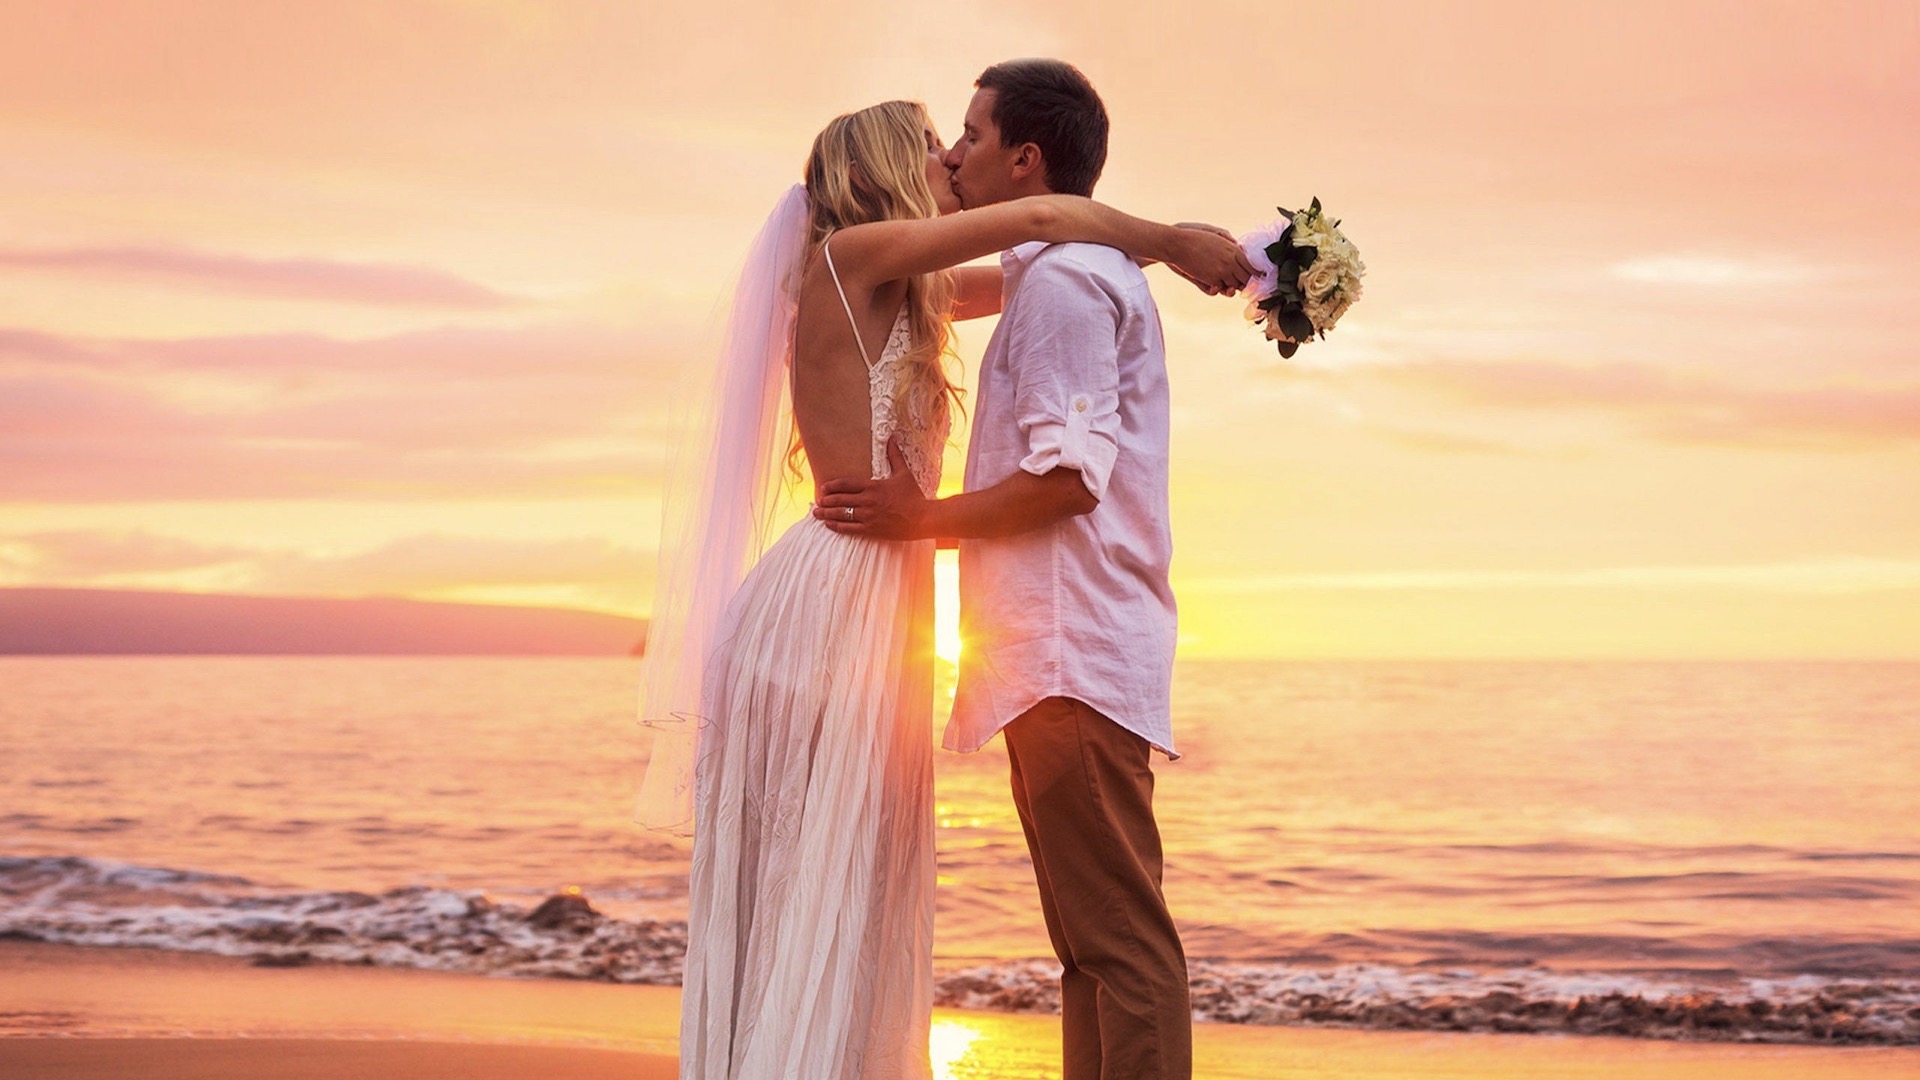 Destination Wedding Contact Us - Couple getting married on tropical beach